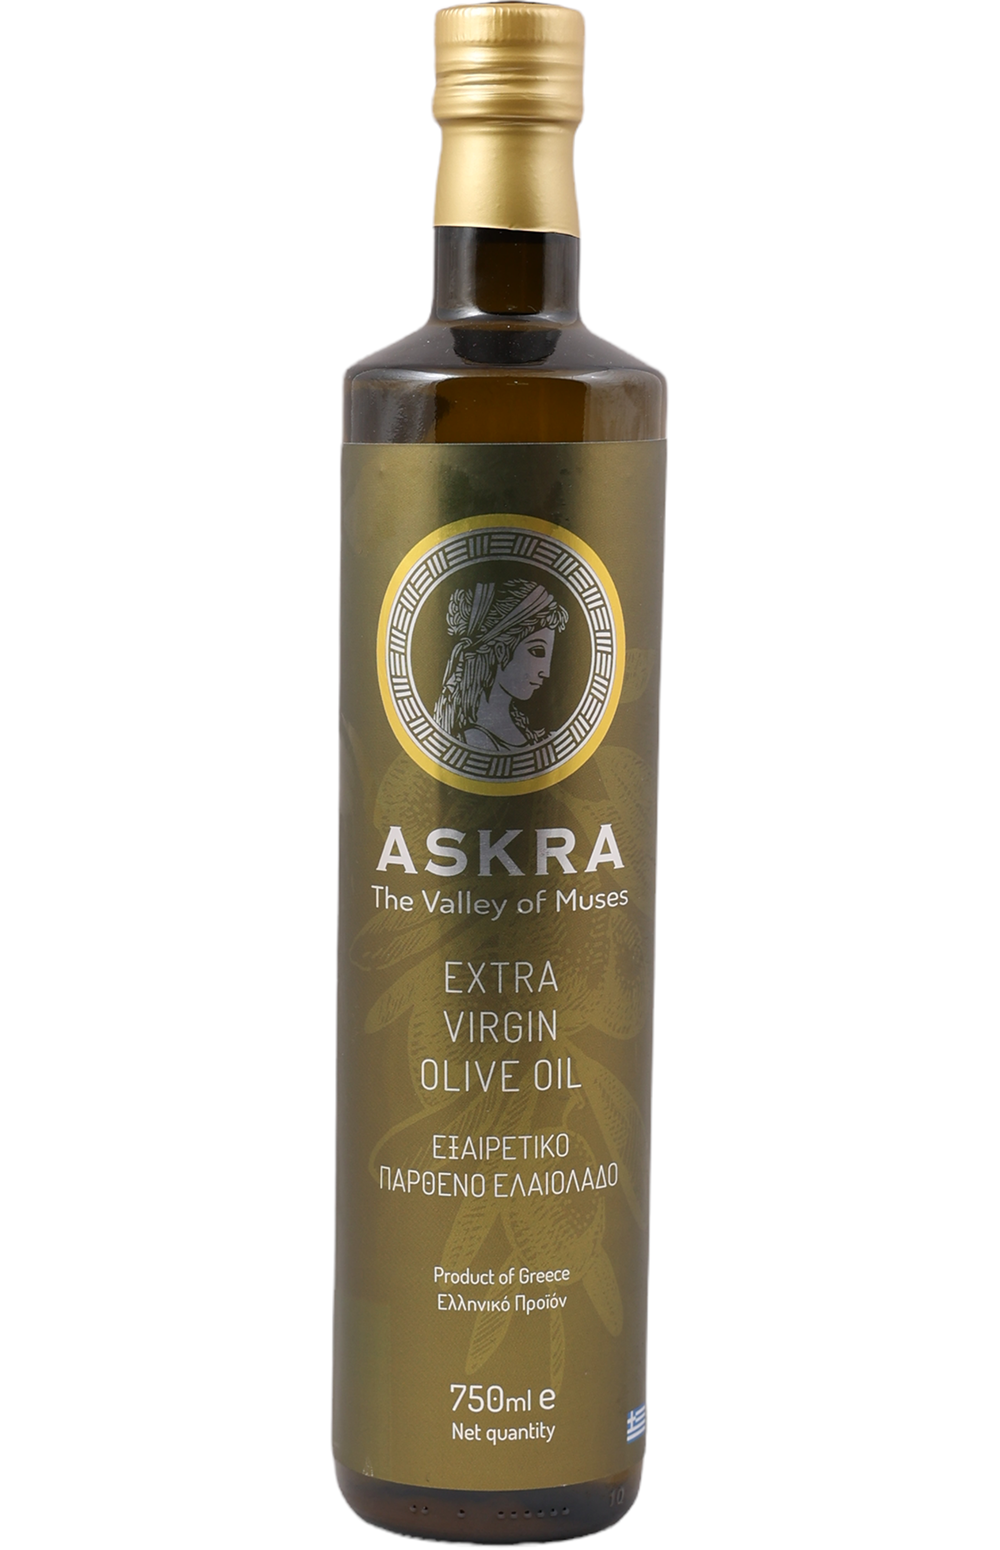 Askra – The Valley of Muses